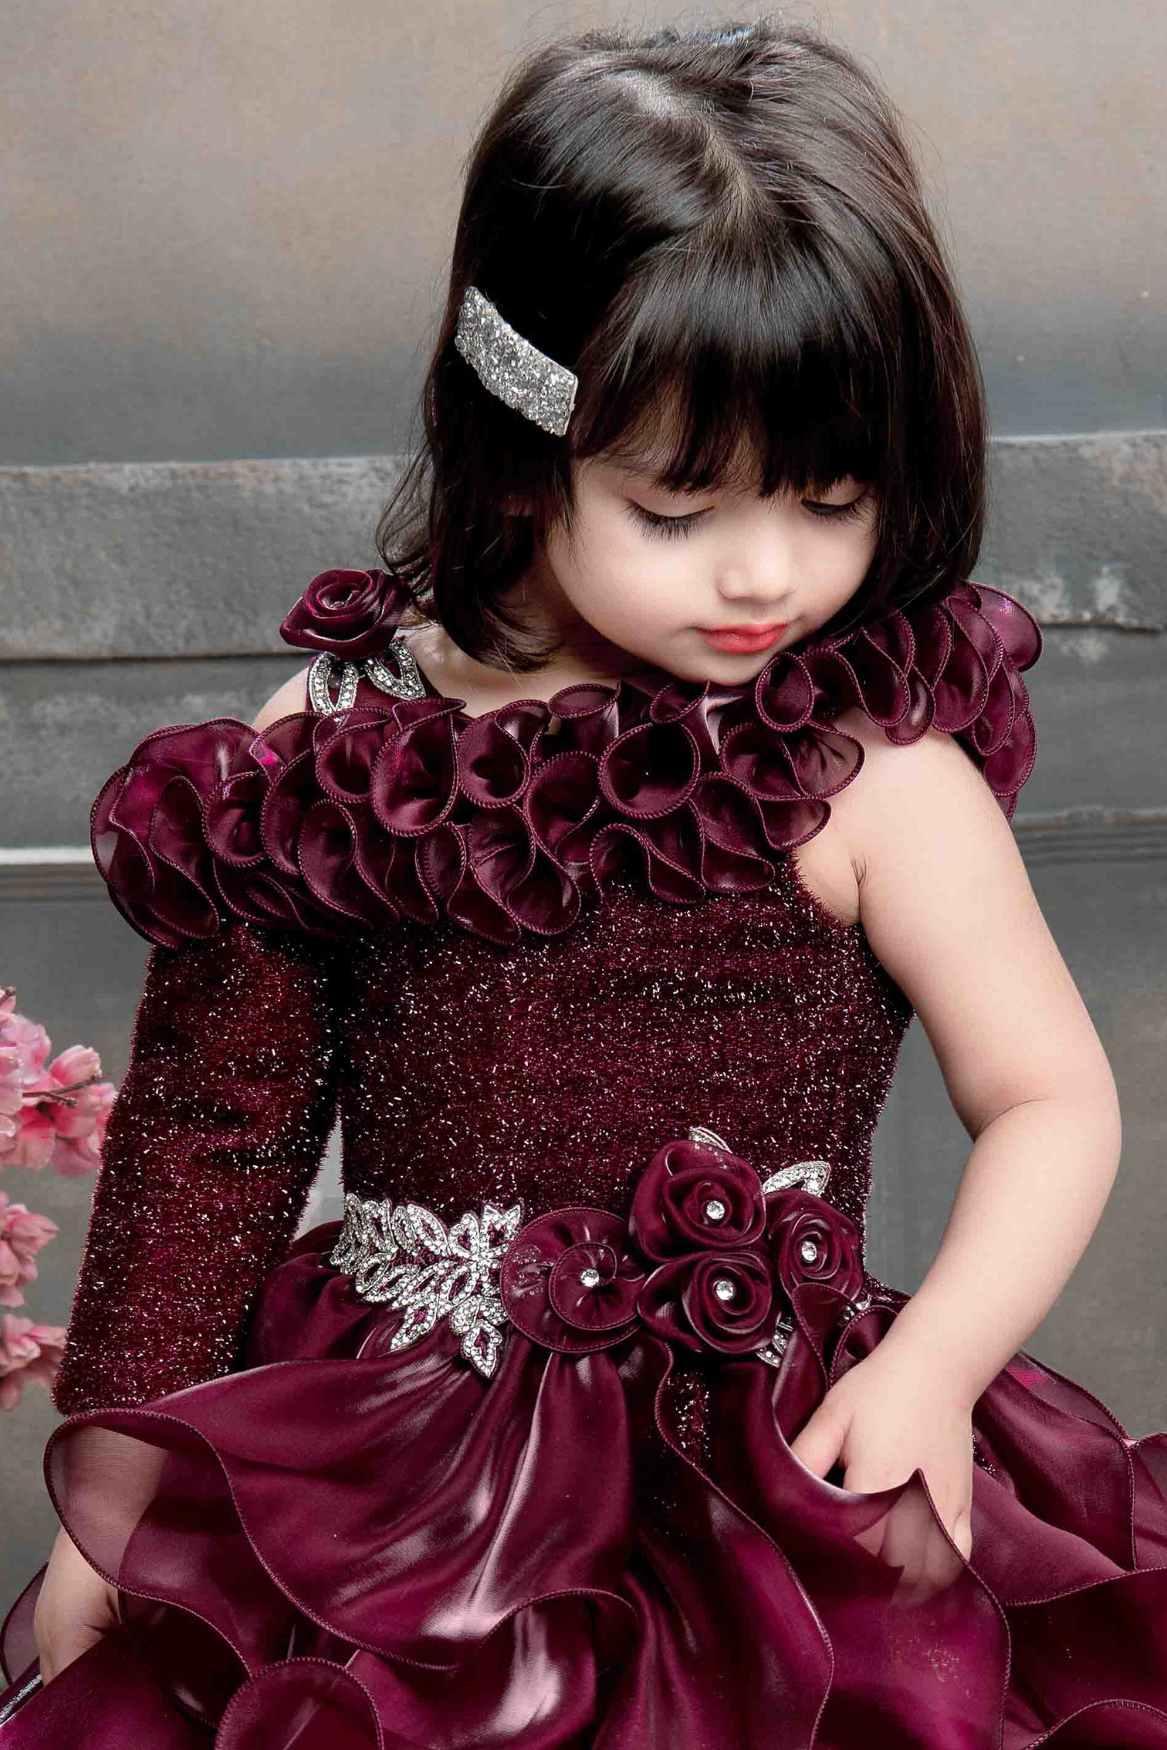 Designer Multilayer Ruffled Maroon Gown With Floral Embellishments For Girls - Lagorii Kids